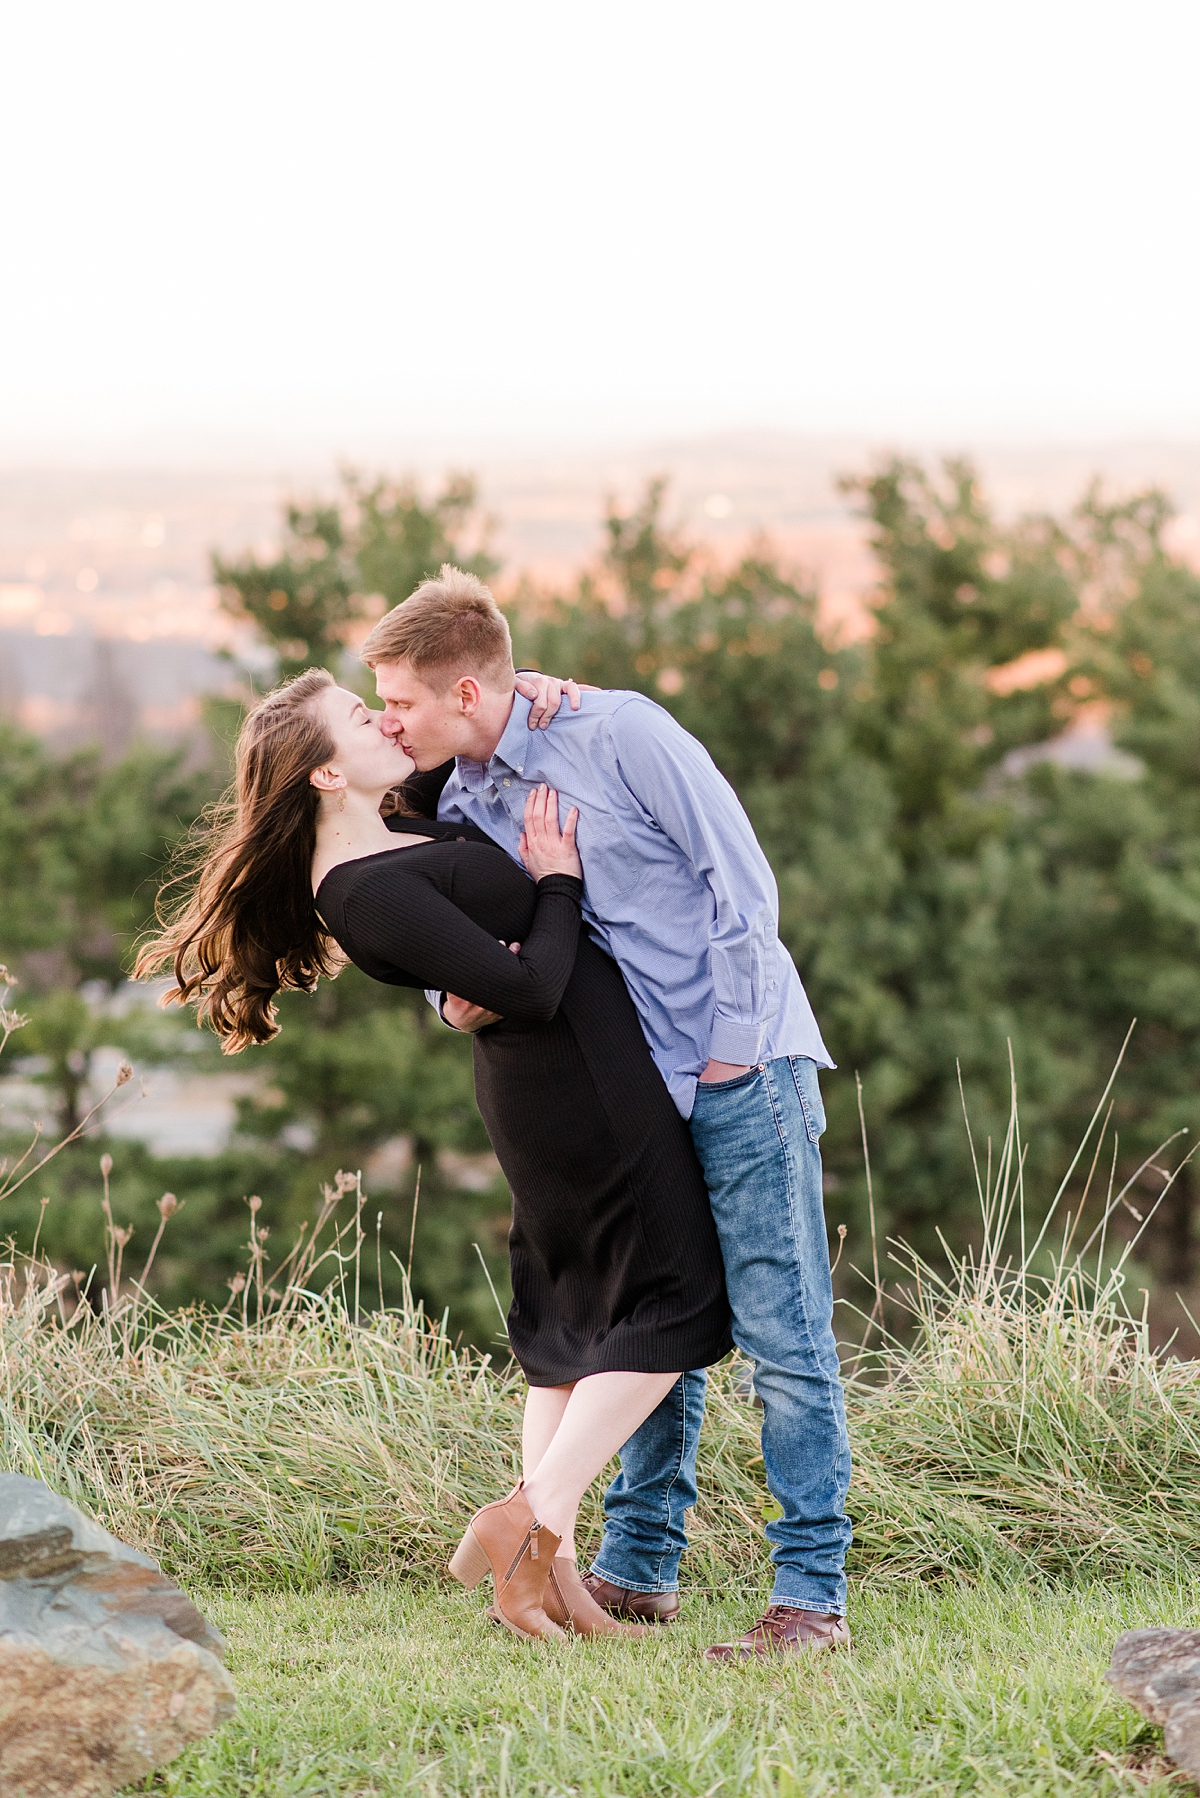 Kiss with Mountain View at Fall Rockfish Gap Overlook Engagement Session. Photography by Richmond Wedding Photographer Kailey Brianne Photography.